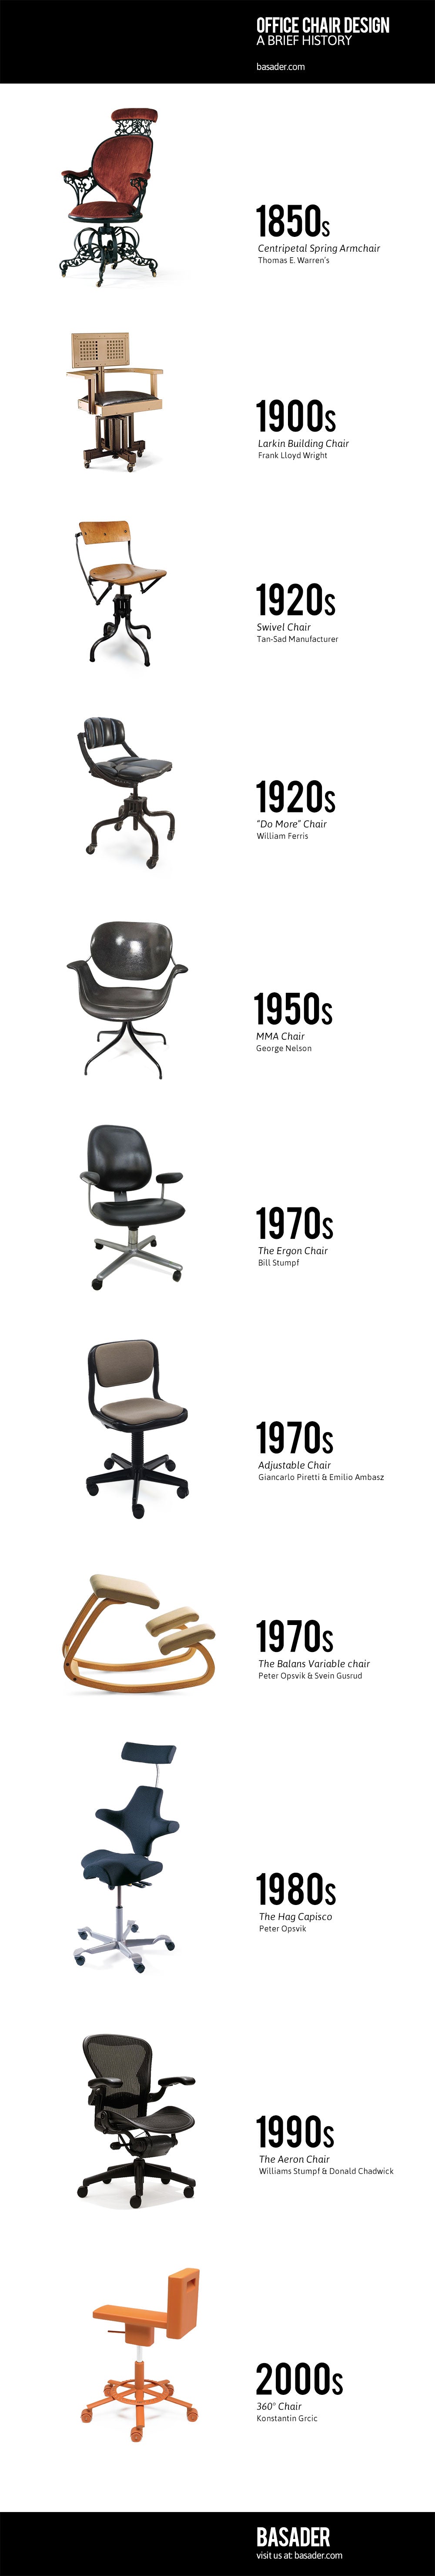 A BRIEF HISTORY OF OFFICE CHAIR DESIGN